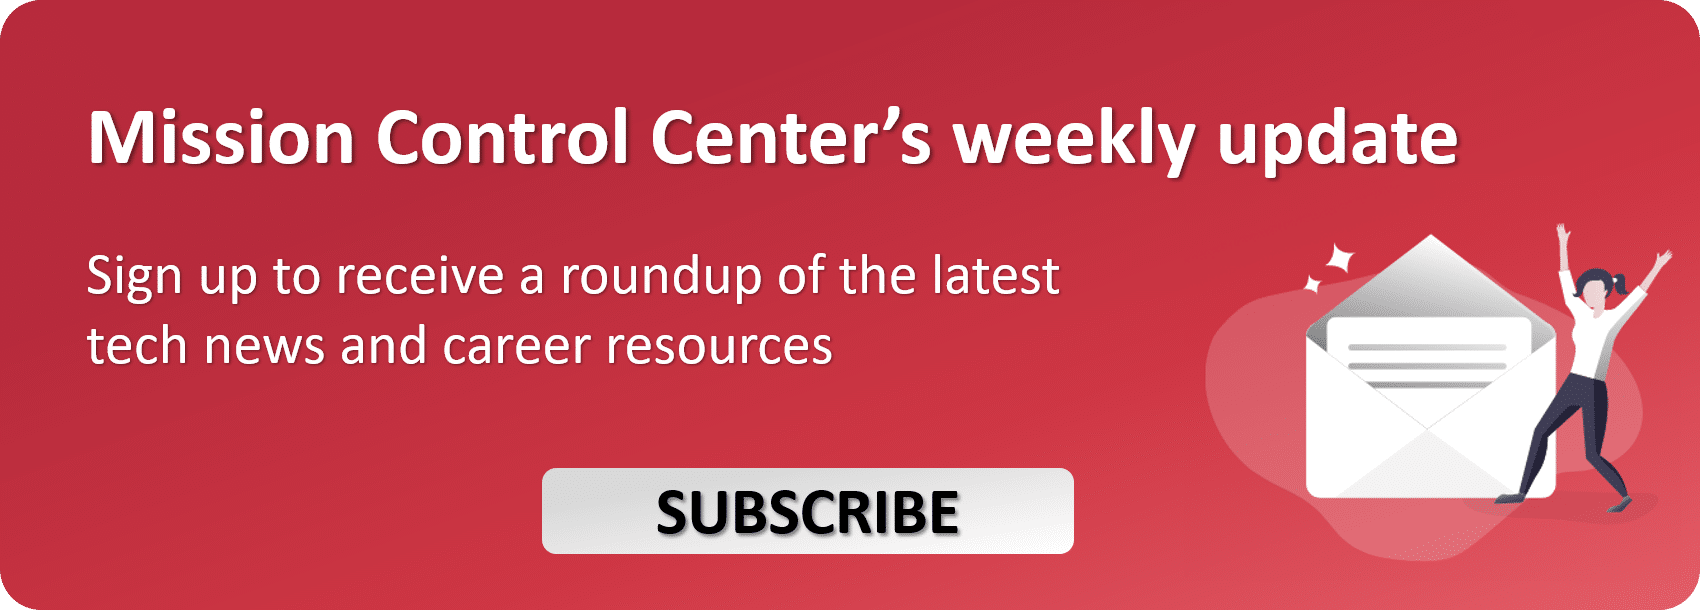 Subscribe to Mission Control Center Newsletter